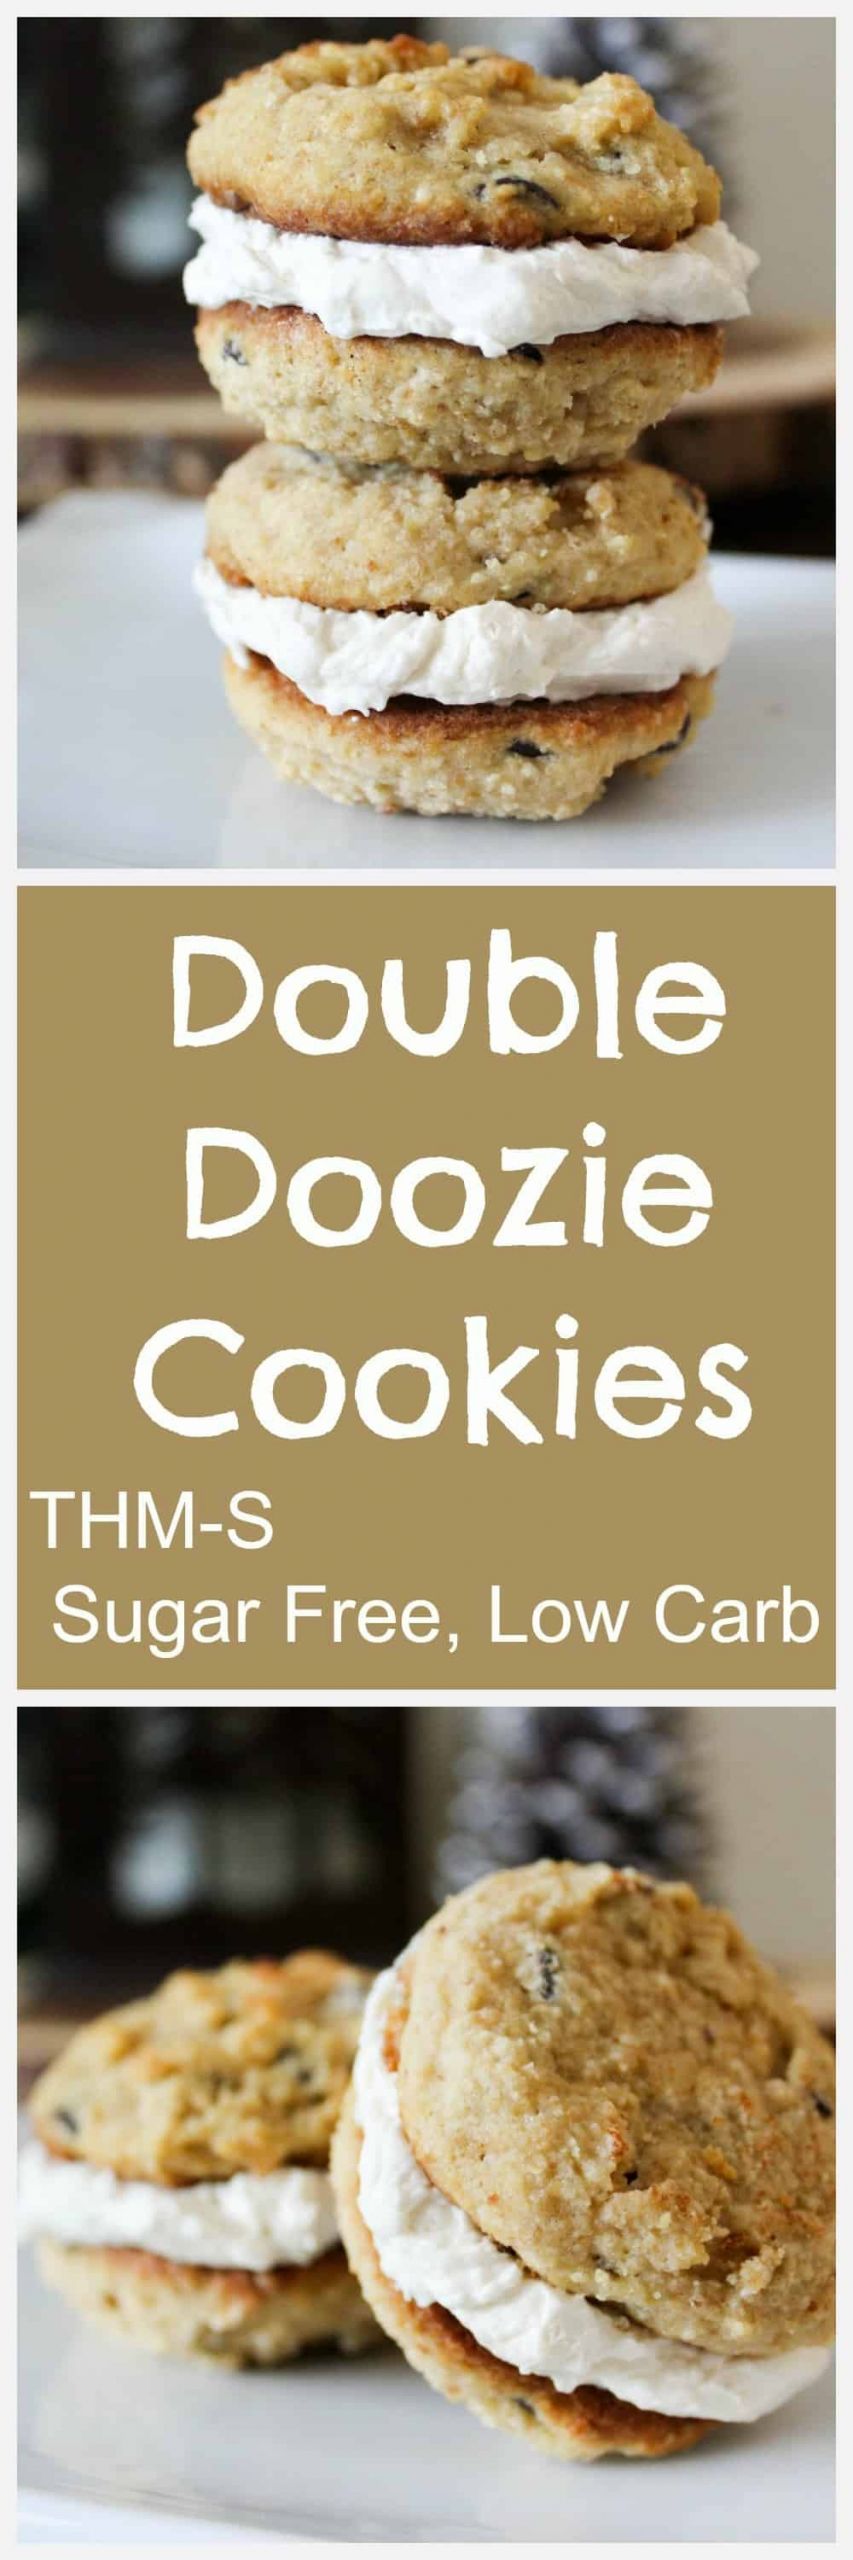 Sugar Free Low Carb Cookies
 Double Doozie Cookies THM S Sugar Free Low Carb